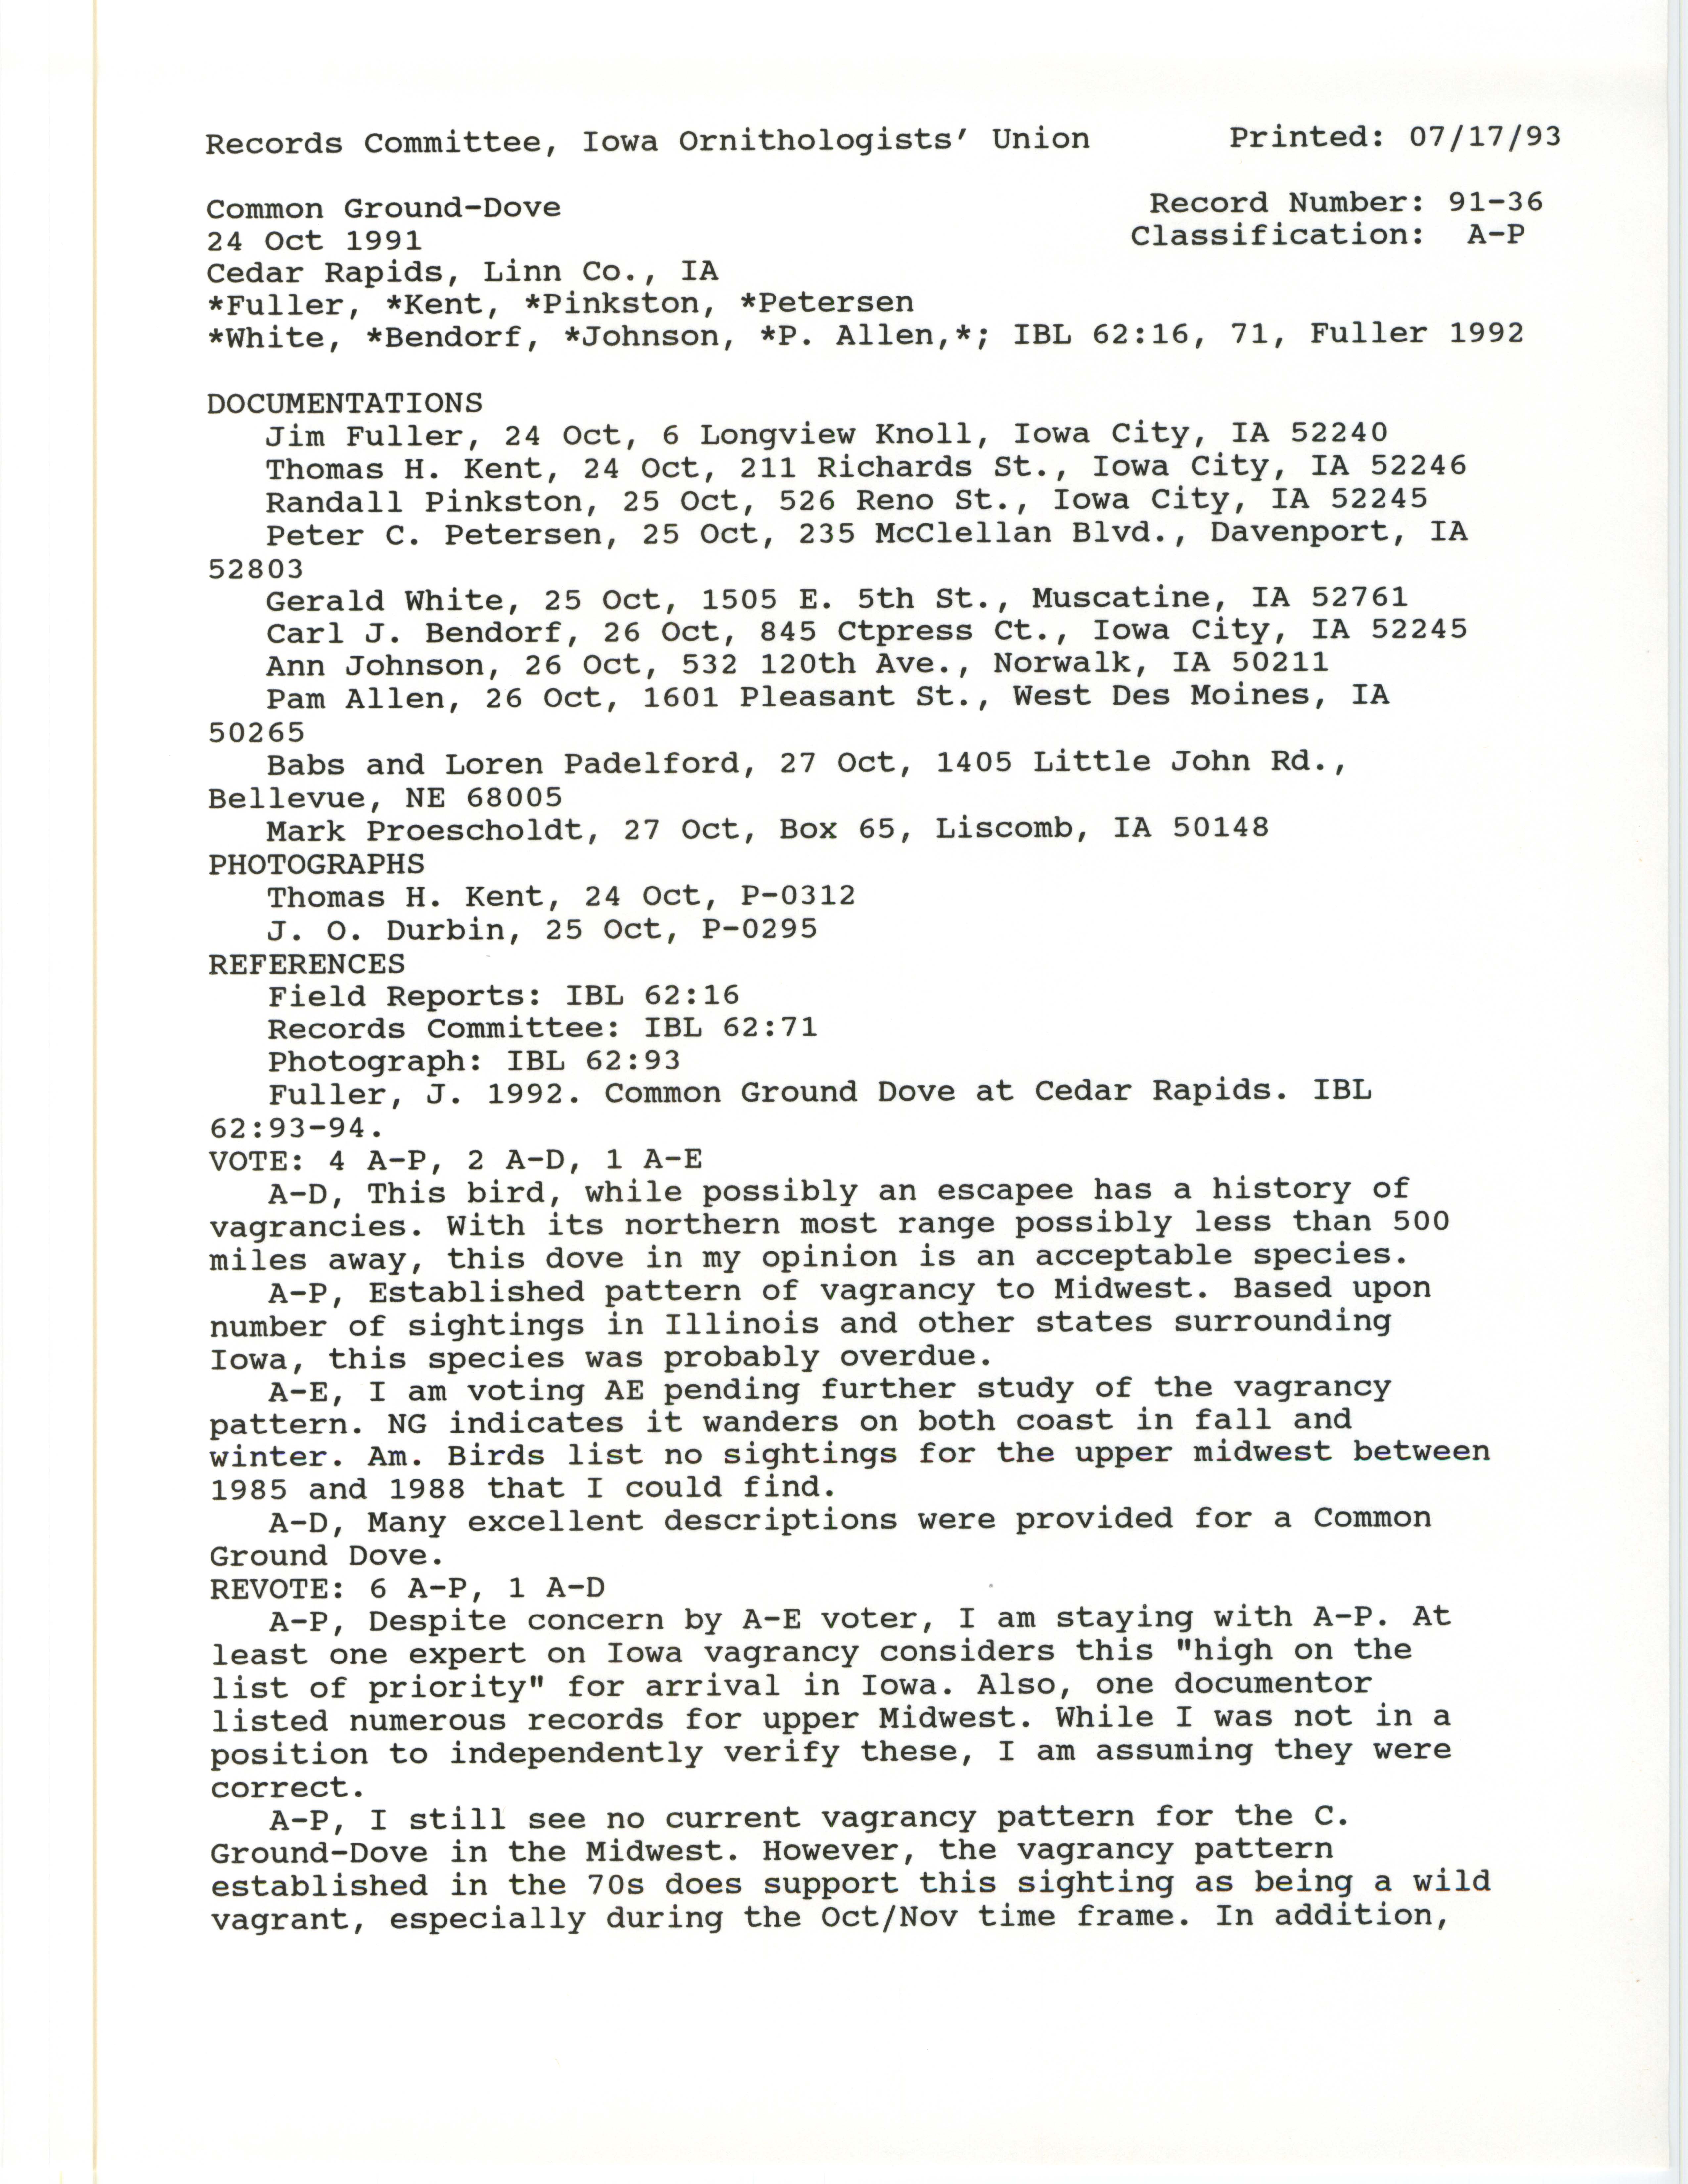 Records Committee review for rare bird sighting for Common Ground-Dove near Mohawk Park at Cedar Rapids, 1991